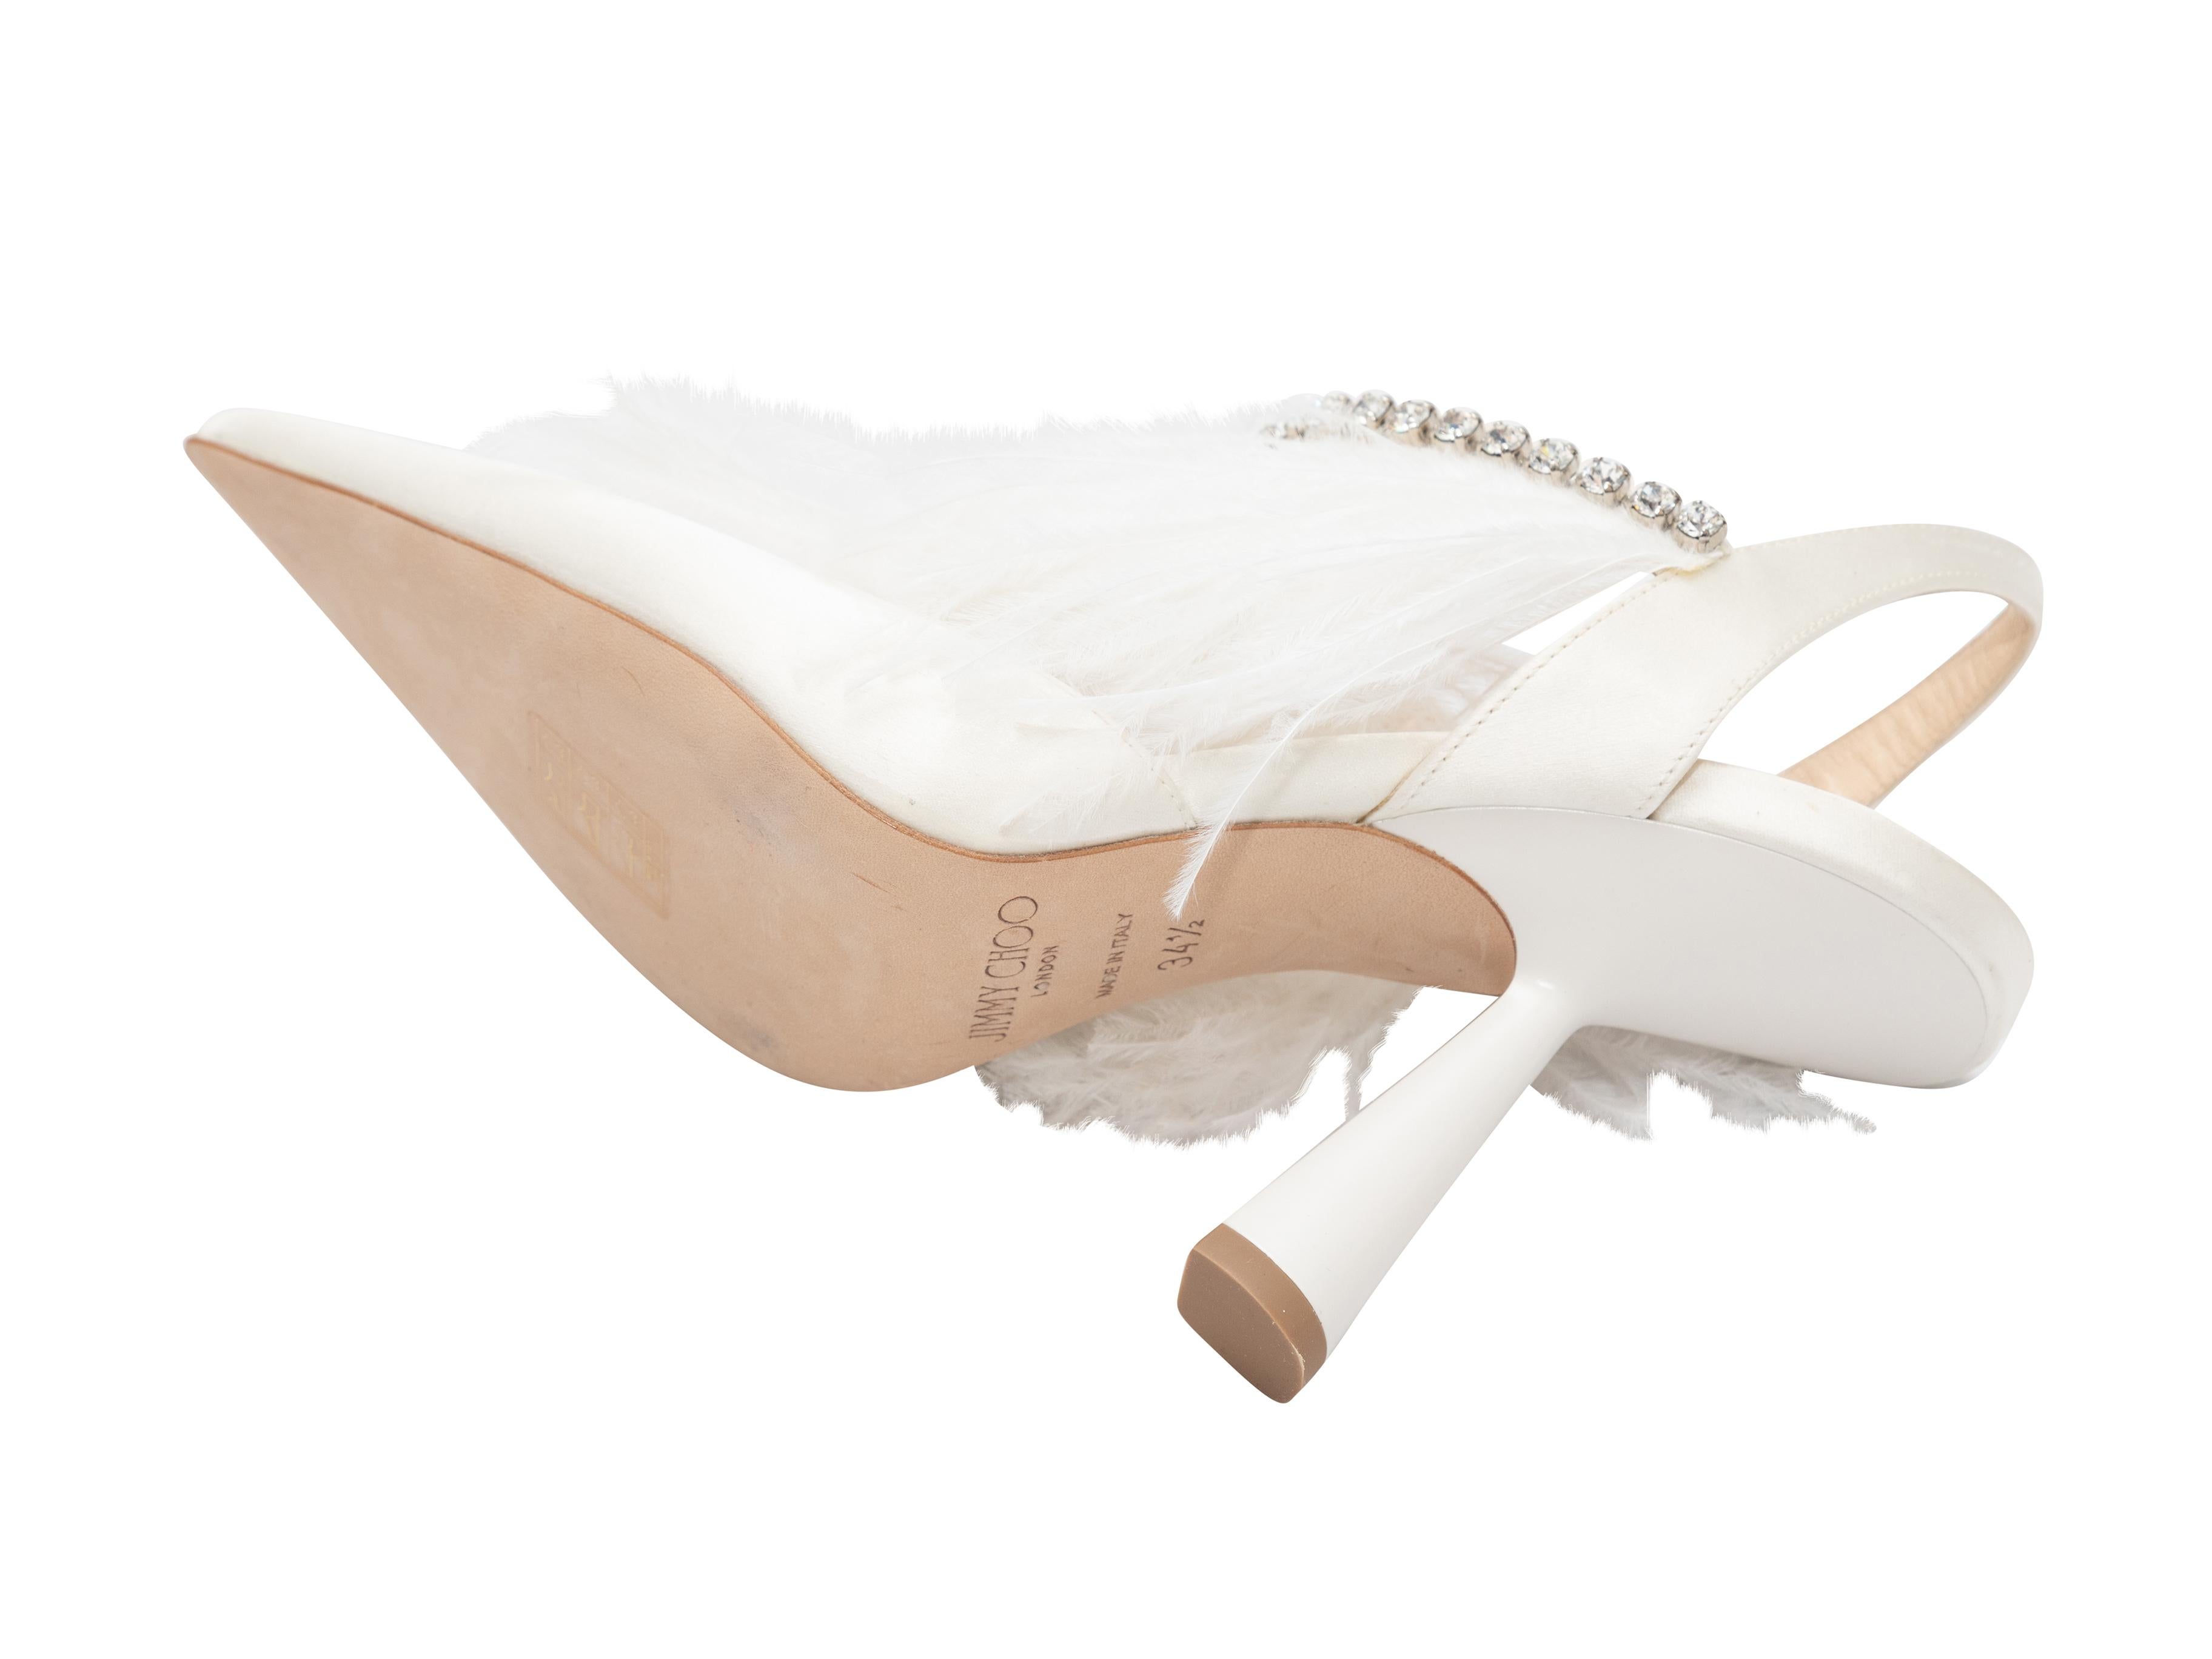 White Jimmy Pointed Pointed-Toe Satin Feather & Crystal-Embellished Heels 34.5 1